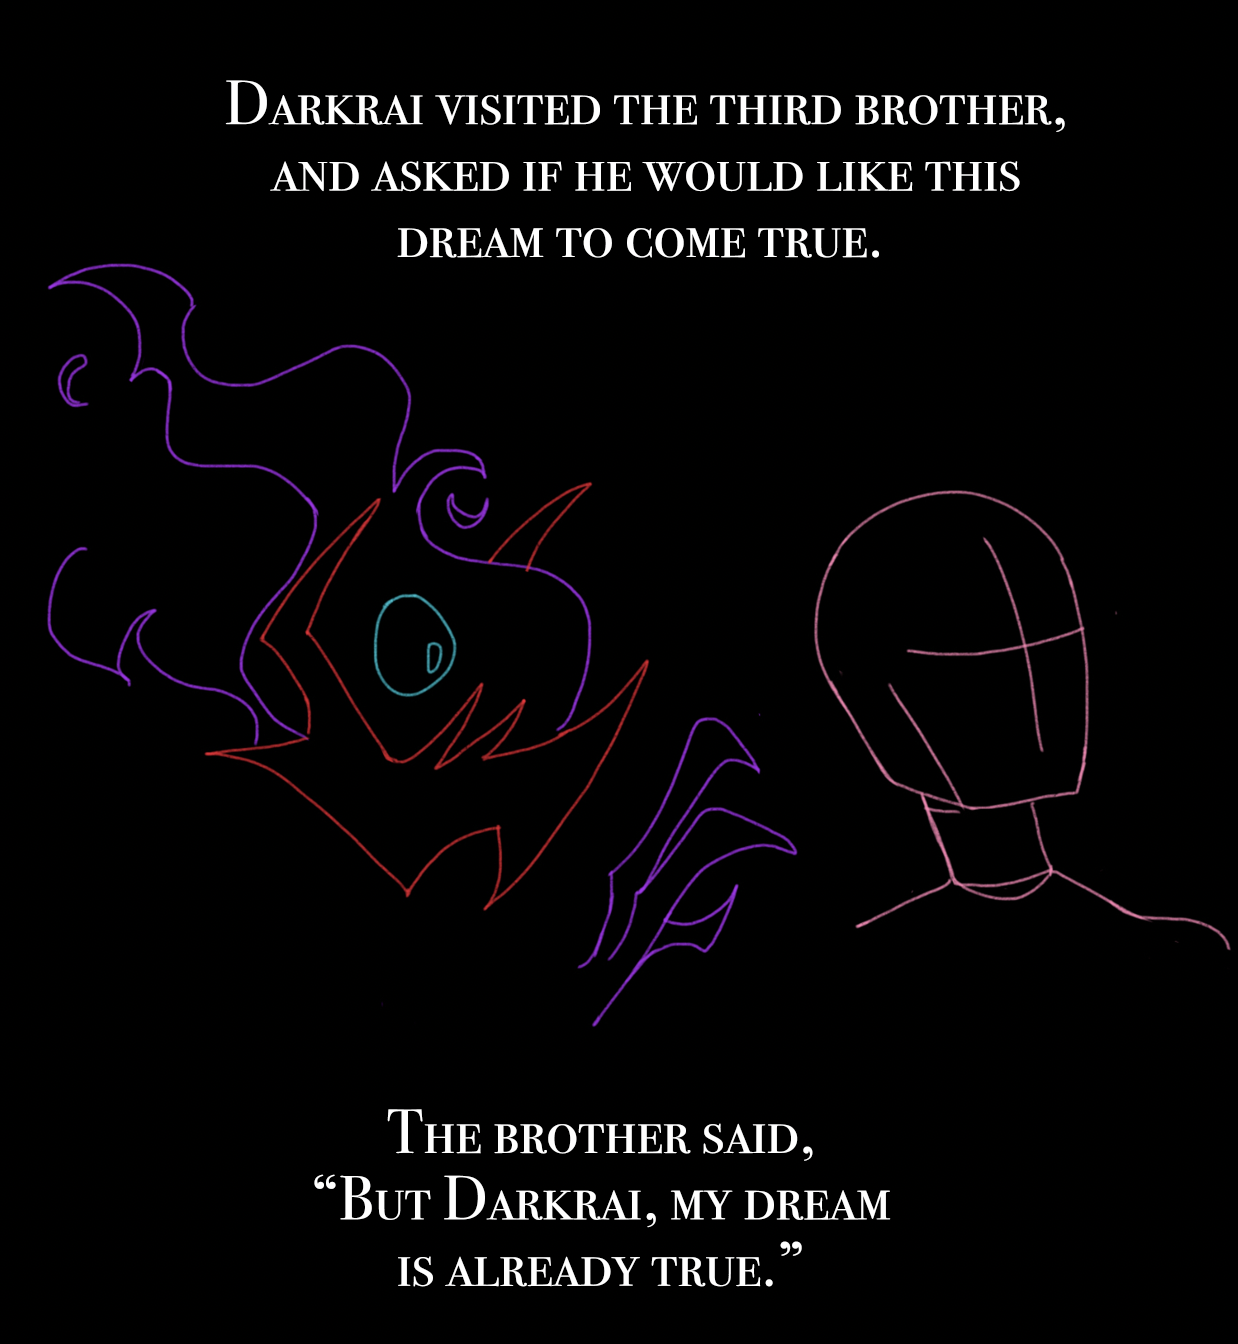 Darkrai visited the third brother, and asked if he would like this dream to come true.The brother said 'but Darkrai, my dream is already true'.